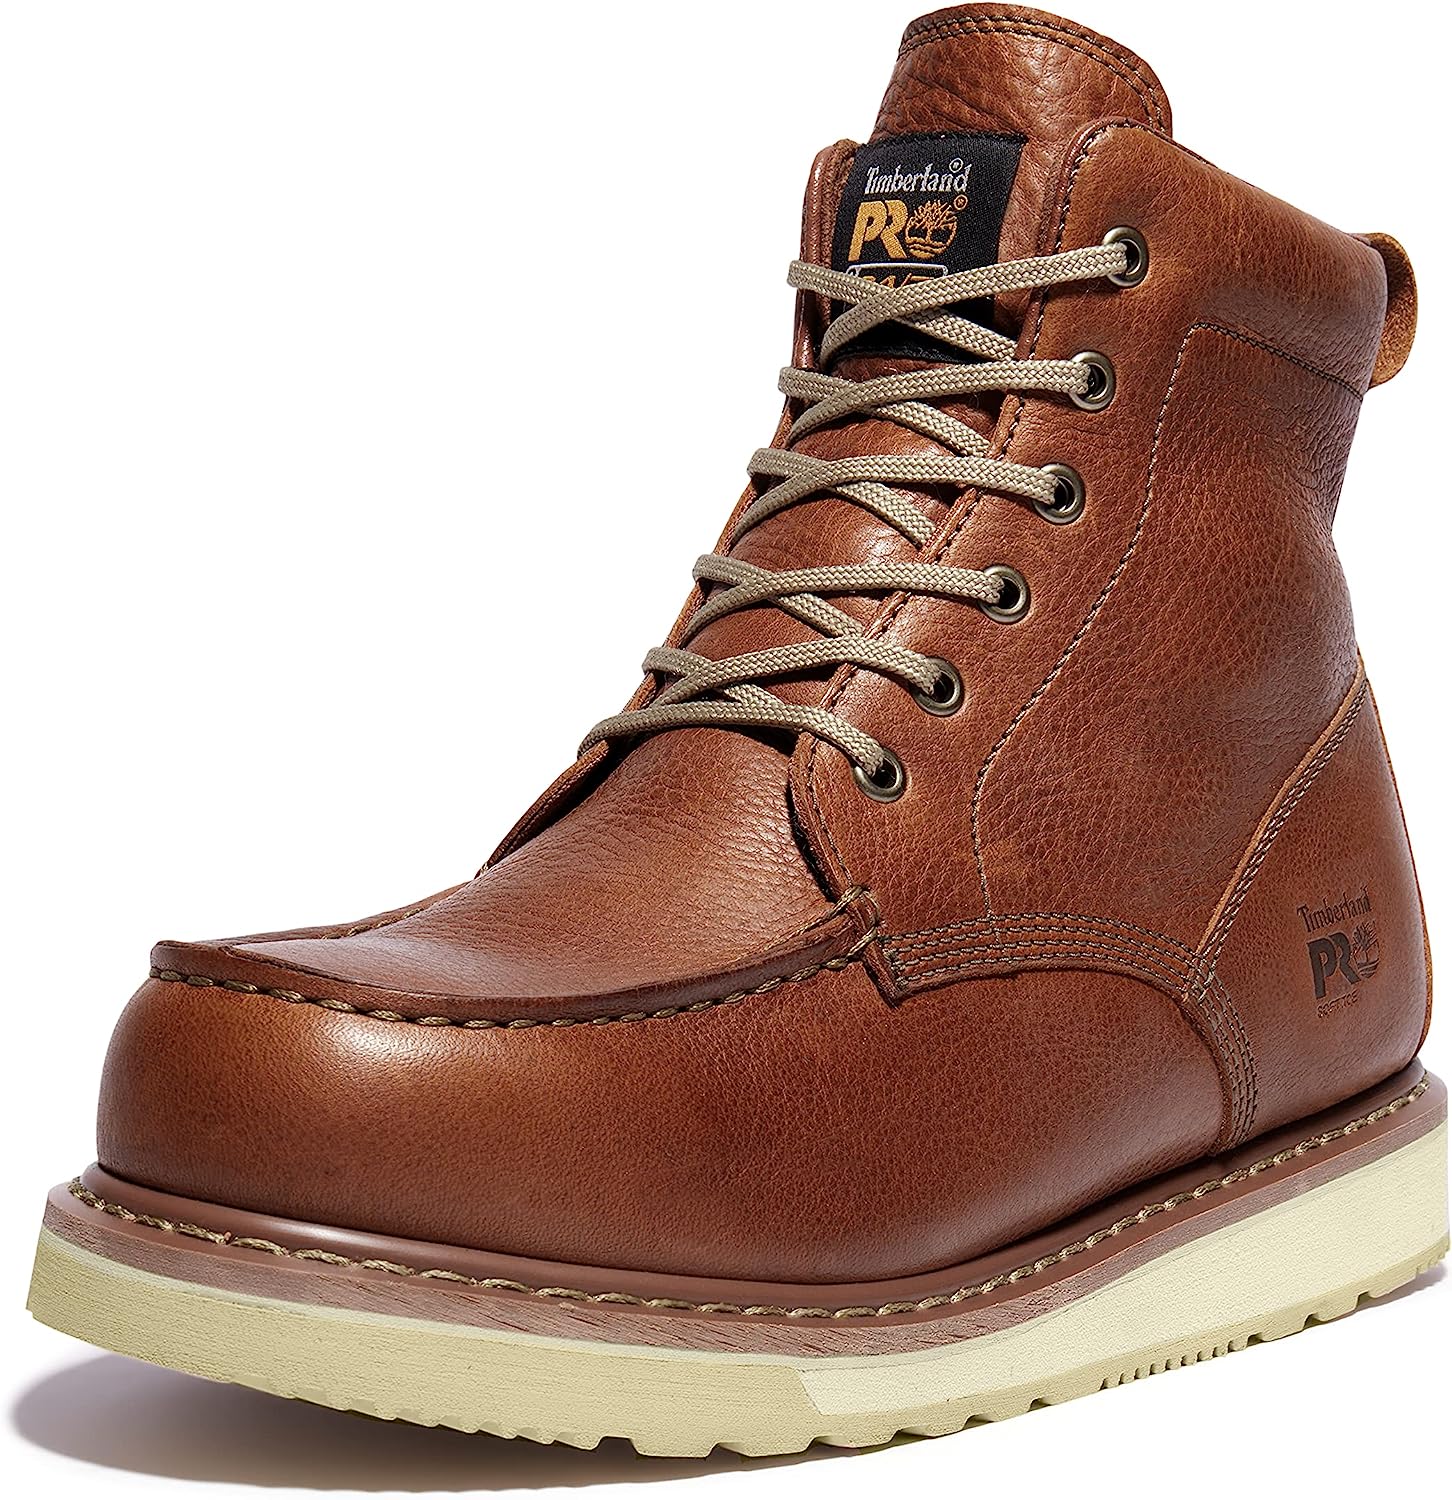 Timberland PRO Men's Wedge Sole 6